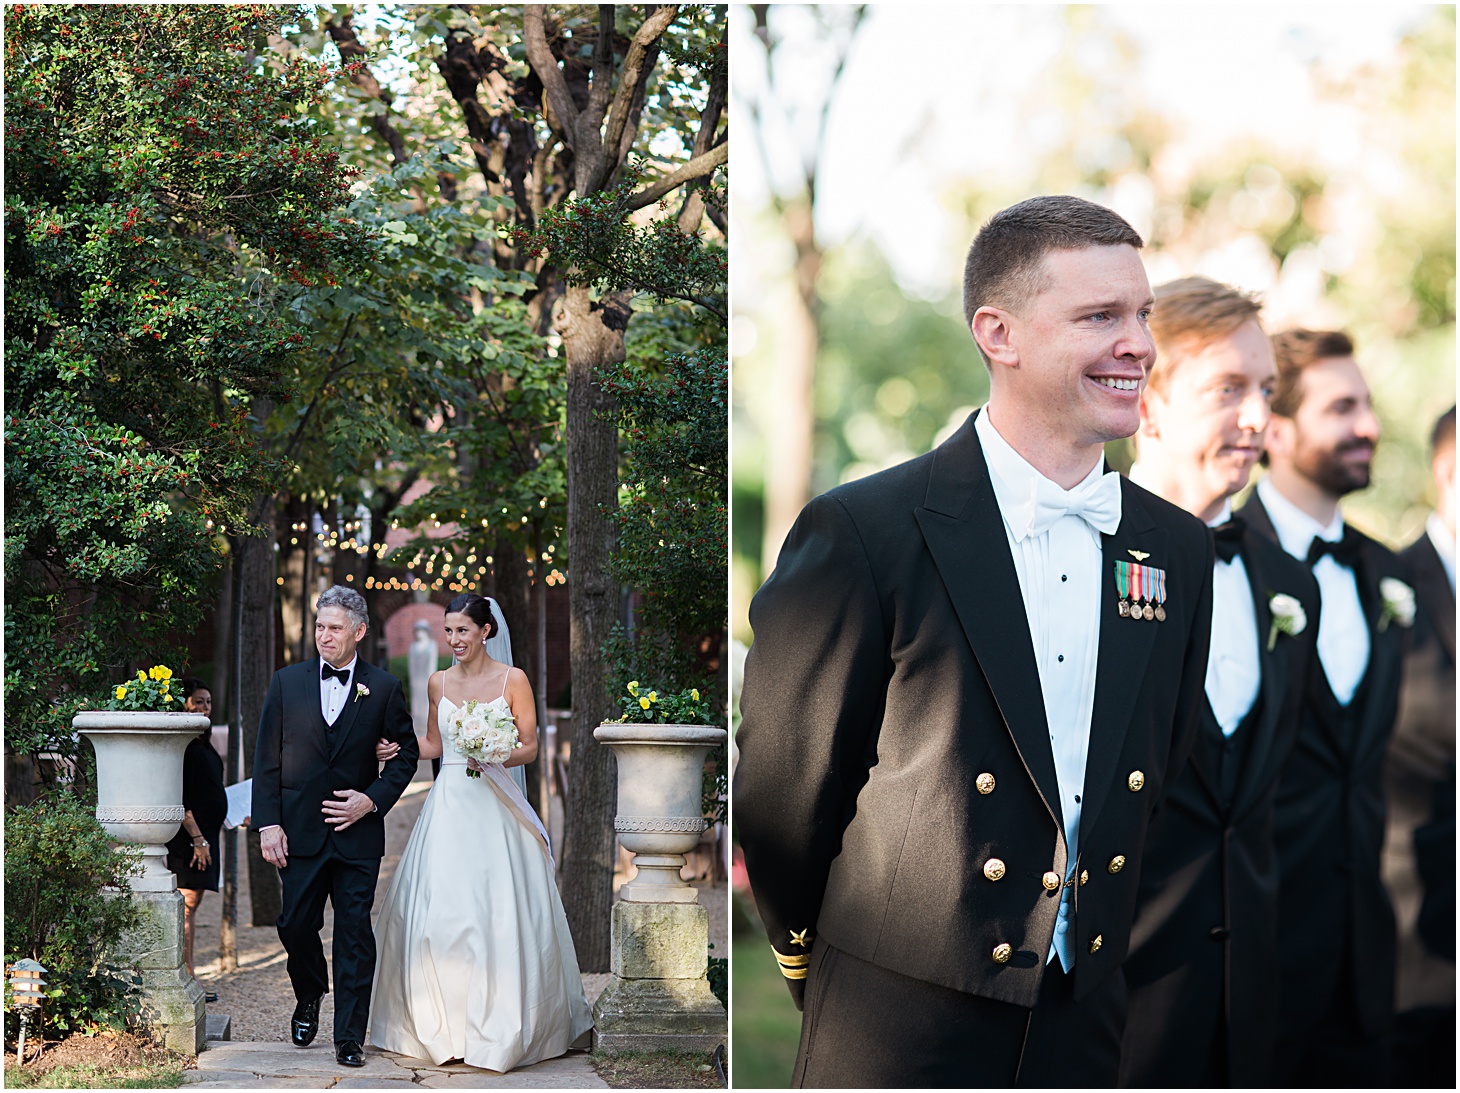 Outdoor Ceremony in October - - A Thoroughly Washingtonian Wedding at Meridian House in DC by Sarah Bradshaw 